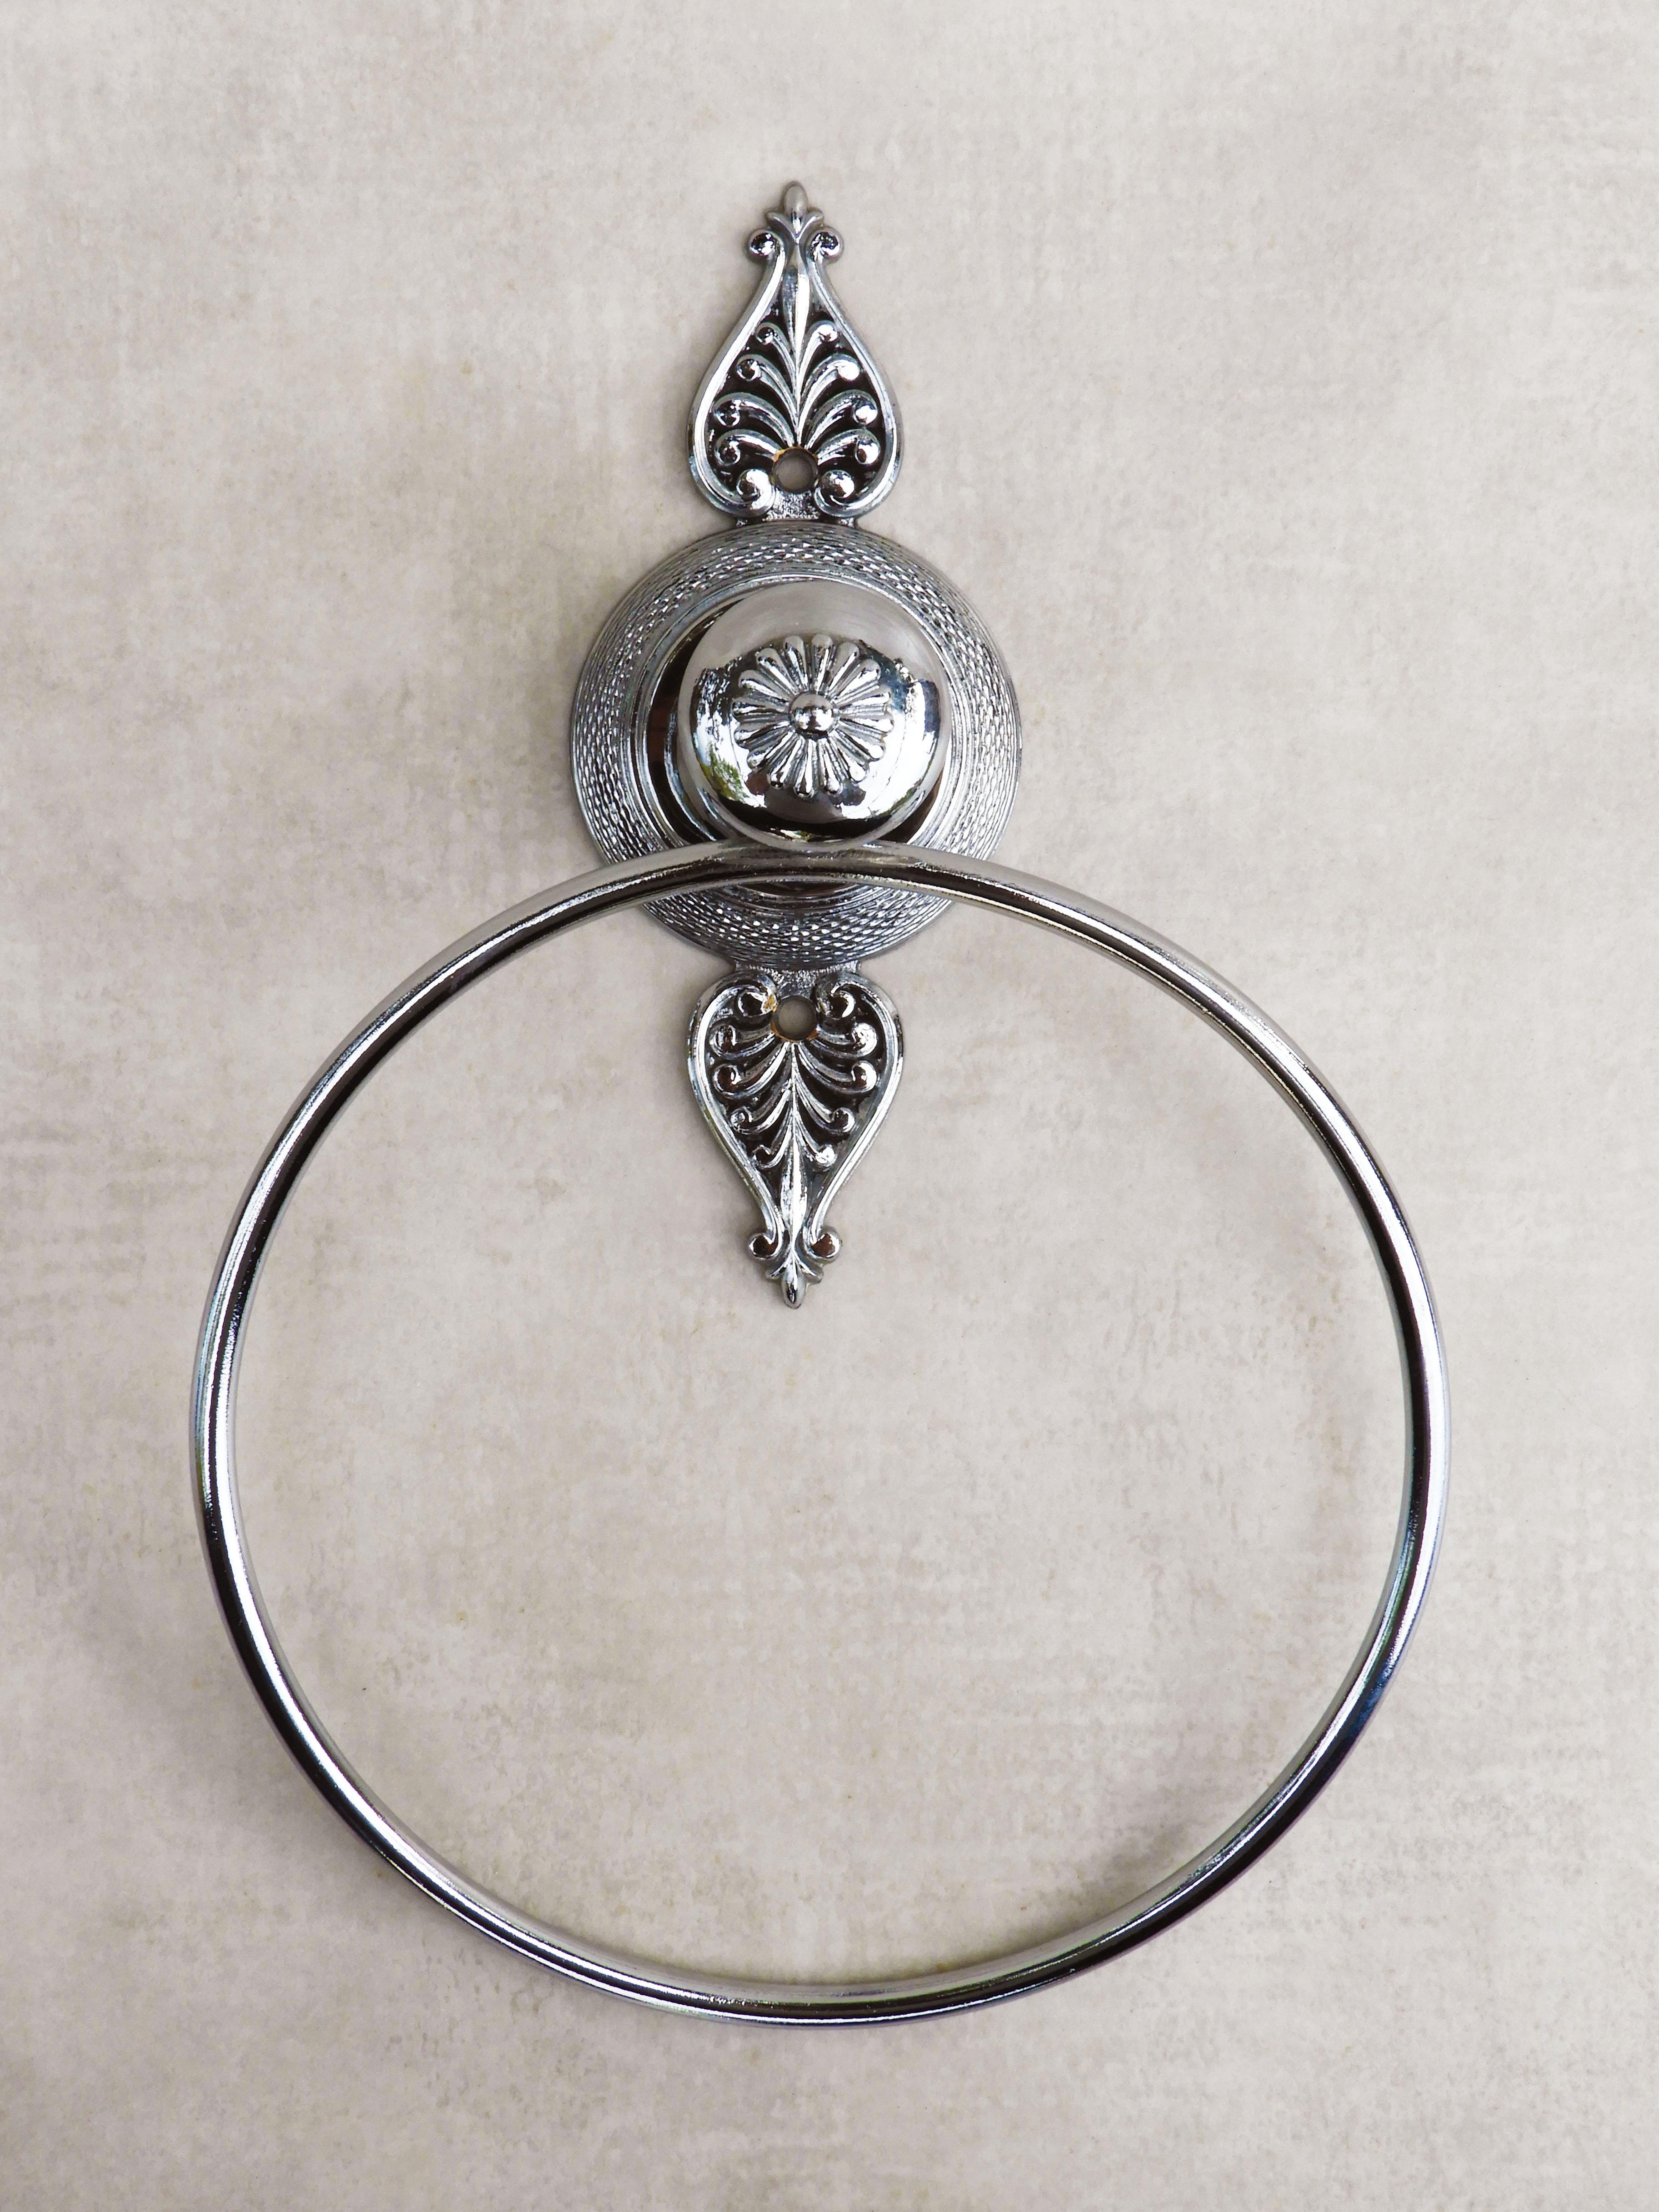 French Empire Revival Style Chrome towel Ring, C1970s. Stylish French 'anneau de serviette' in chrome, a sophisticated modern take on a timeless classic design. Well-made, good-quality piece, in great vintage condition with only light wear